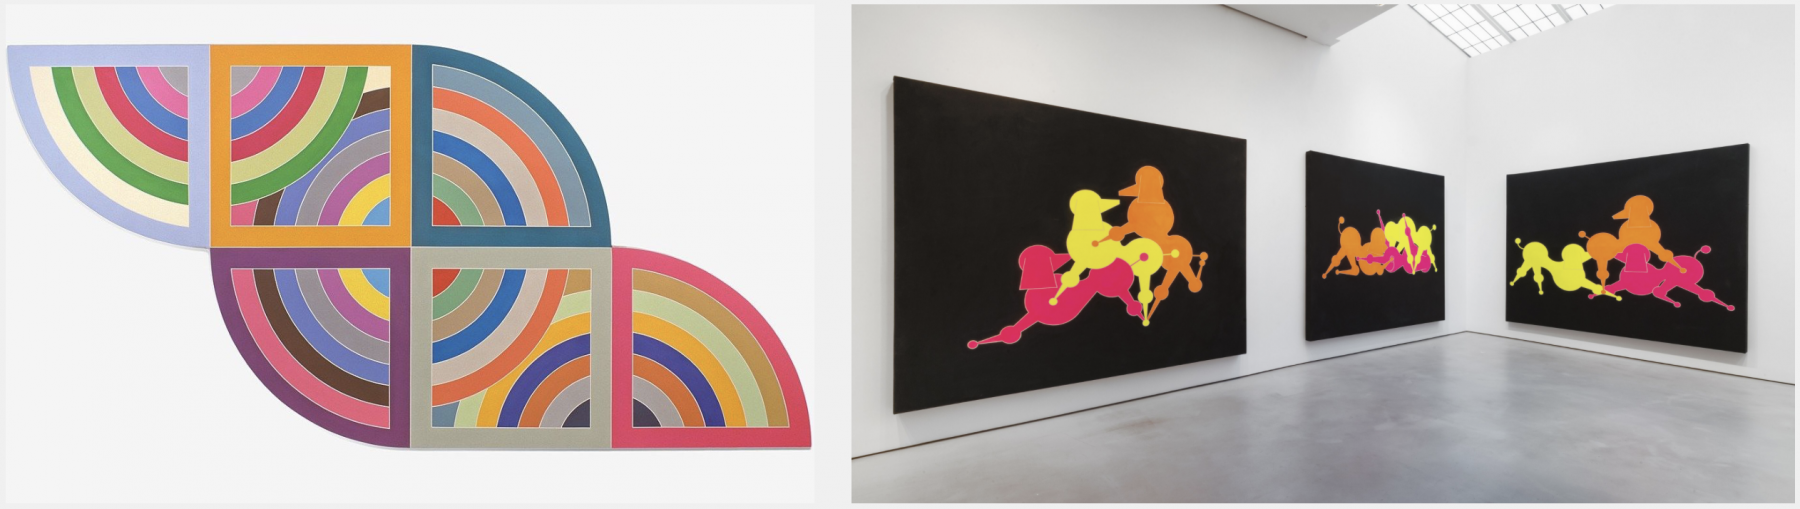 Left: Frank Stella, Harran II (1967) / Solomon R. Guggenheim Museum, New York (Gift, Mr. Irving Blum, 1982) &amp;copy; Frank Stella / Artists Rights Society (ARS), New York.

Right: GENERAL IDEA, Installation view of Mondo Cane Kama Sutra (1984) in P is for Poodle at Mitchell-Innes &amp;amp; Nash, New York, 2020.